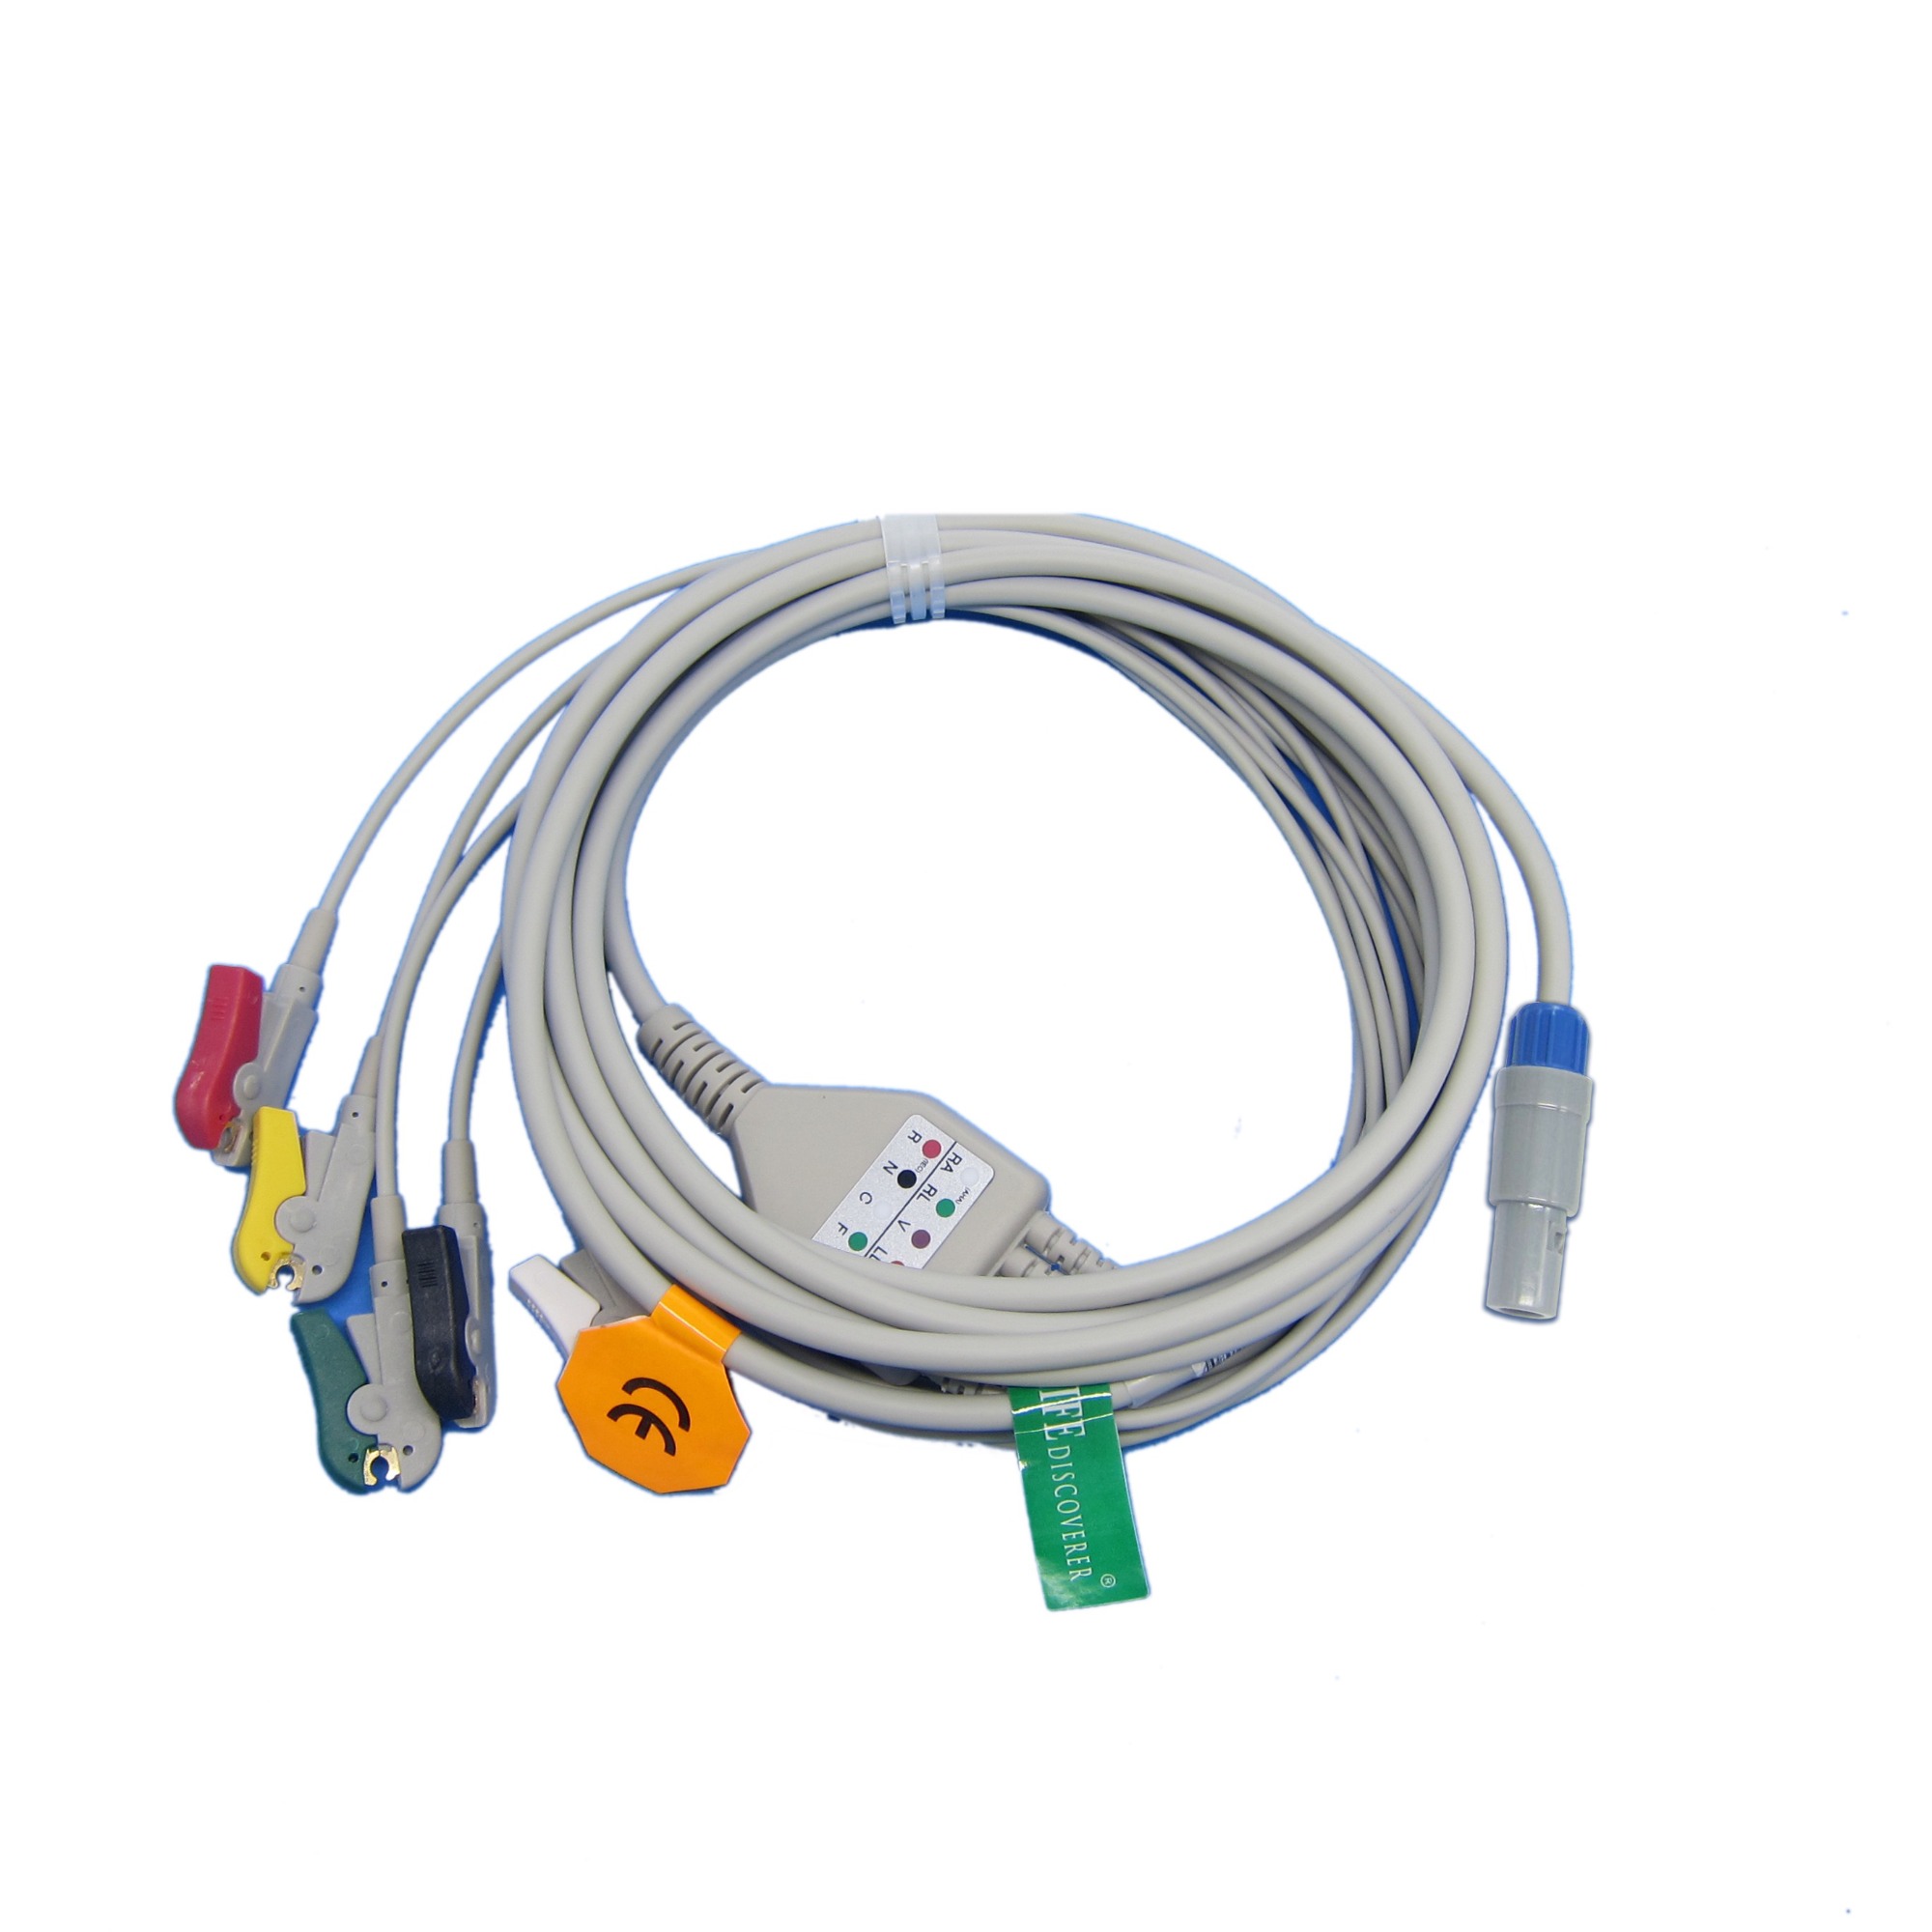 Hot sales One-piece 3 or 5 Leads Snap Or Clip ECG cable and leadwires for ECG MACHINE